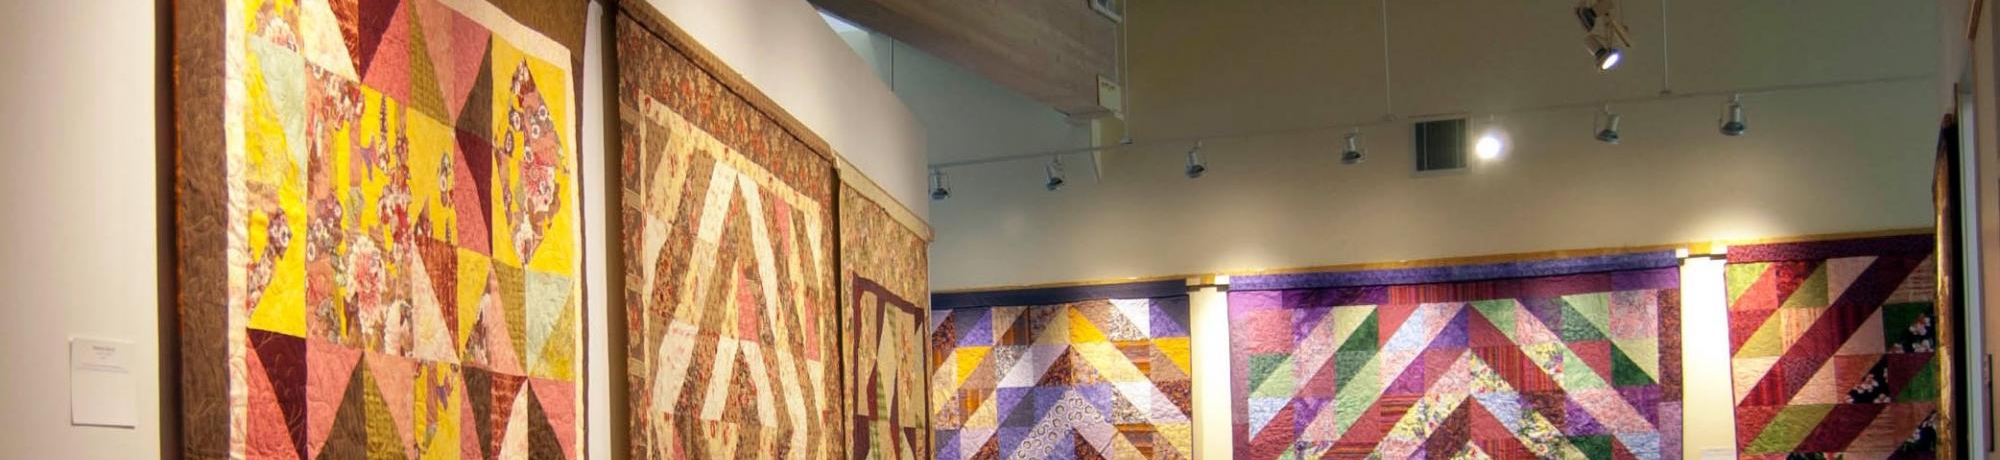 Quilts of different colors and patterns hanging on the walls of the art gallery at the Alumni Center.